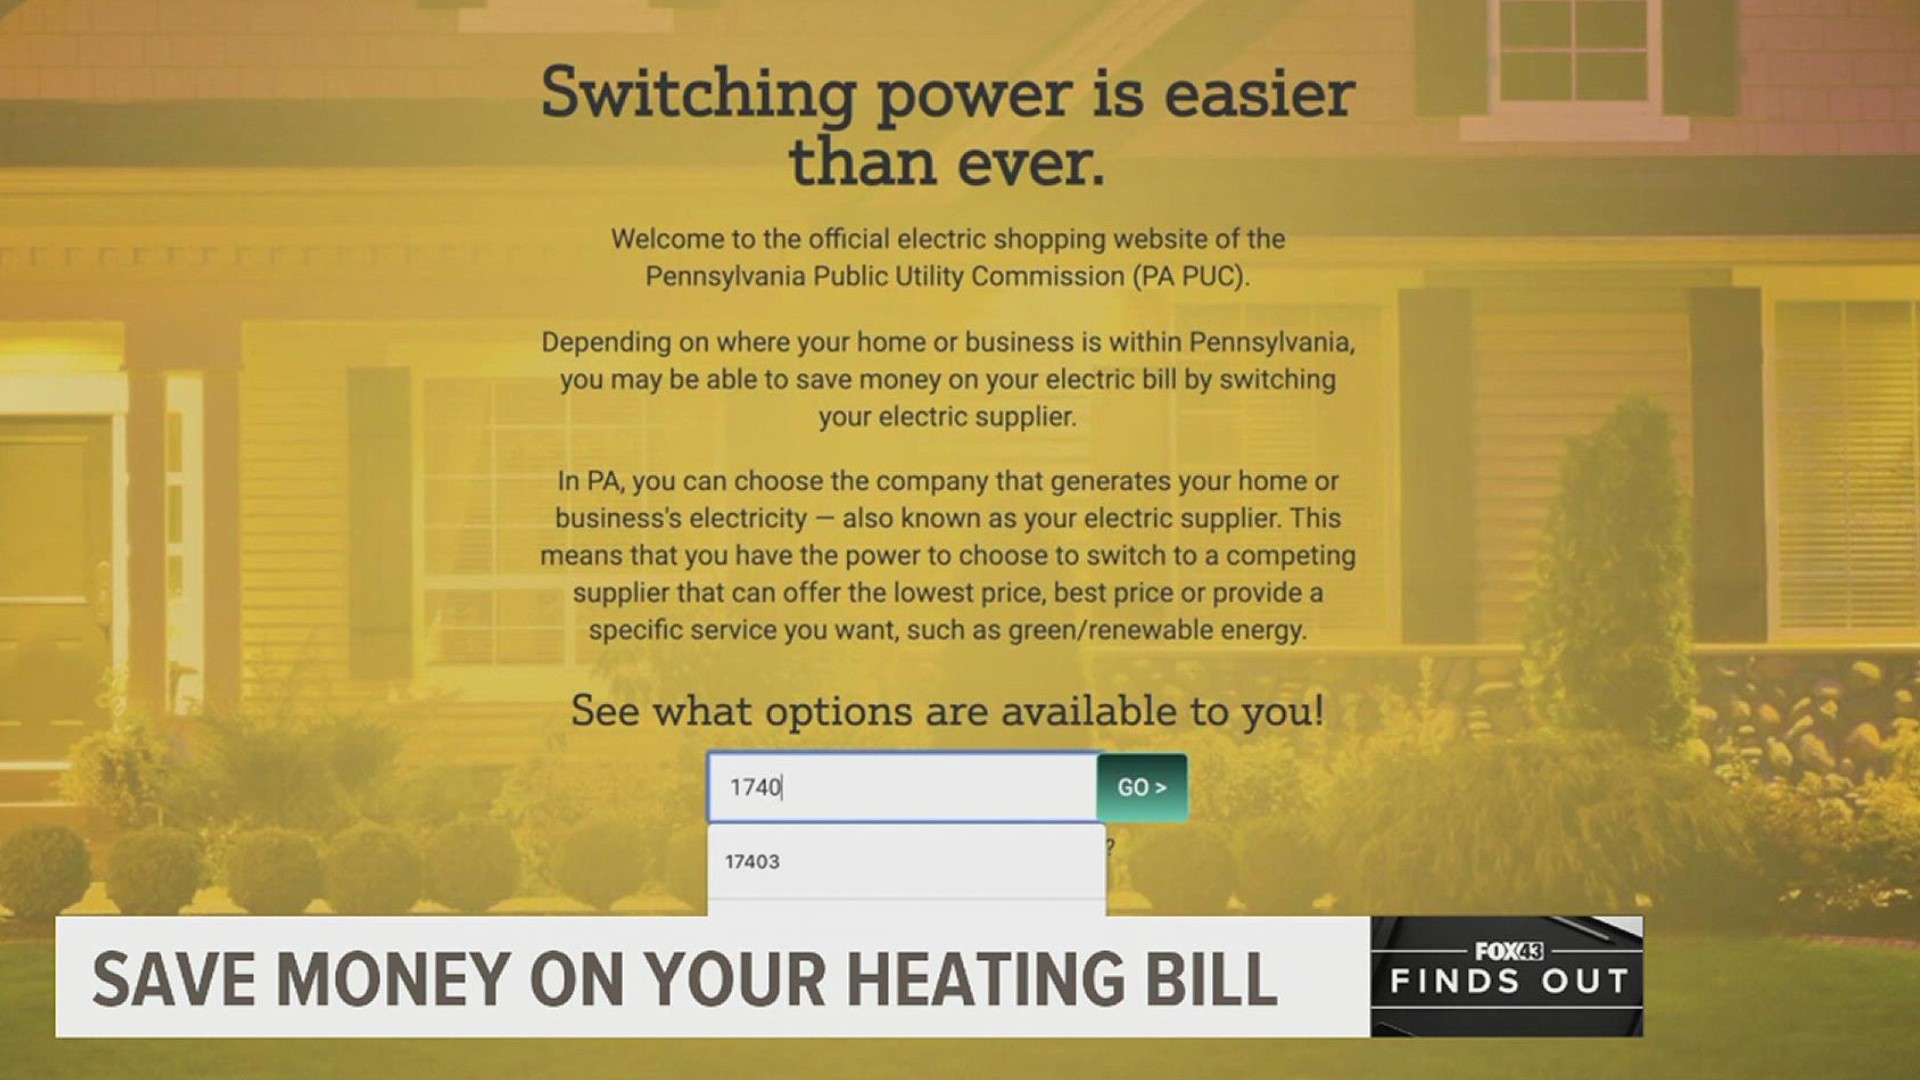 Home heating prices could cost Pennsylvanians 54% higher that last year. FOX43 Finds Out how you can shop around to save money.